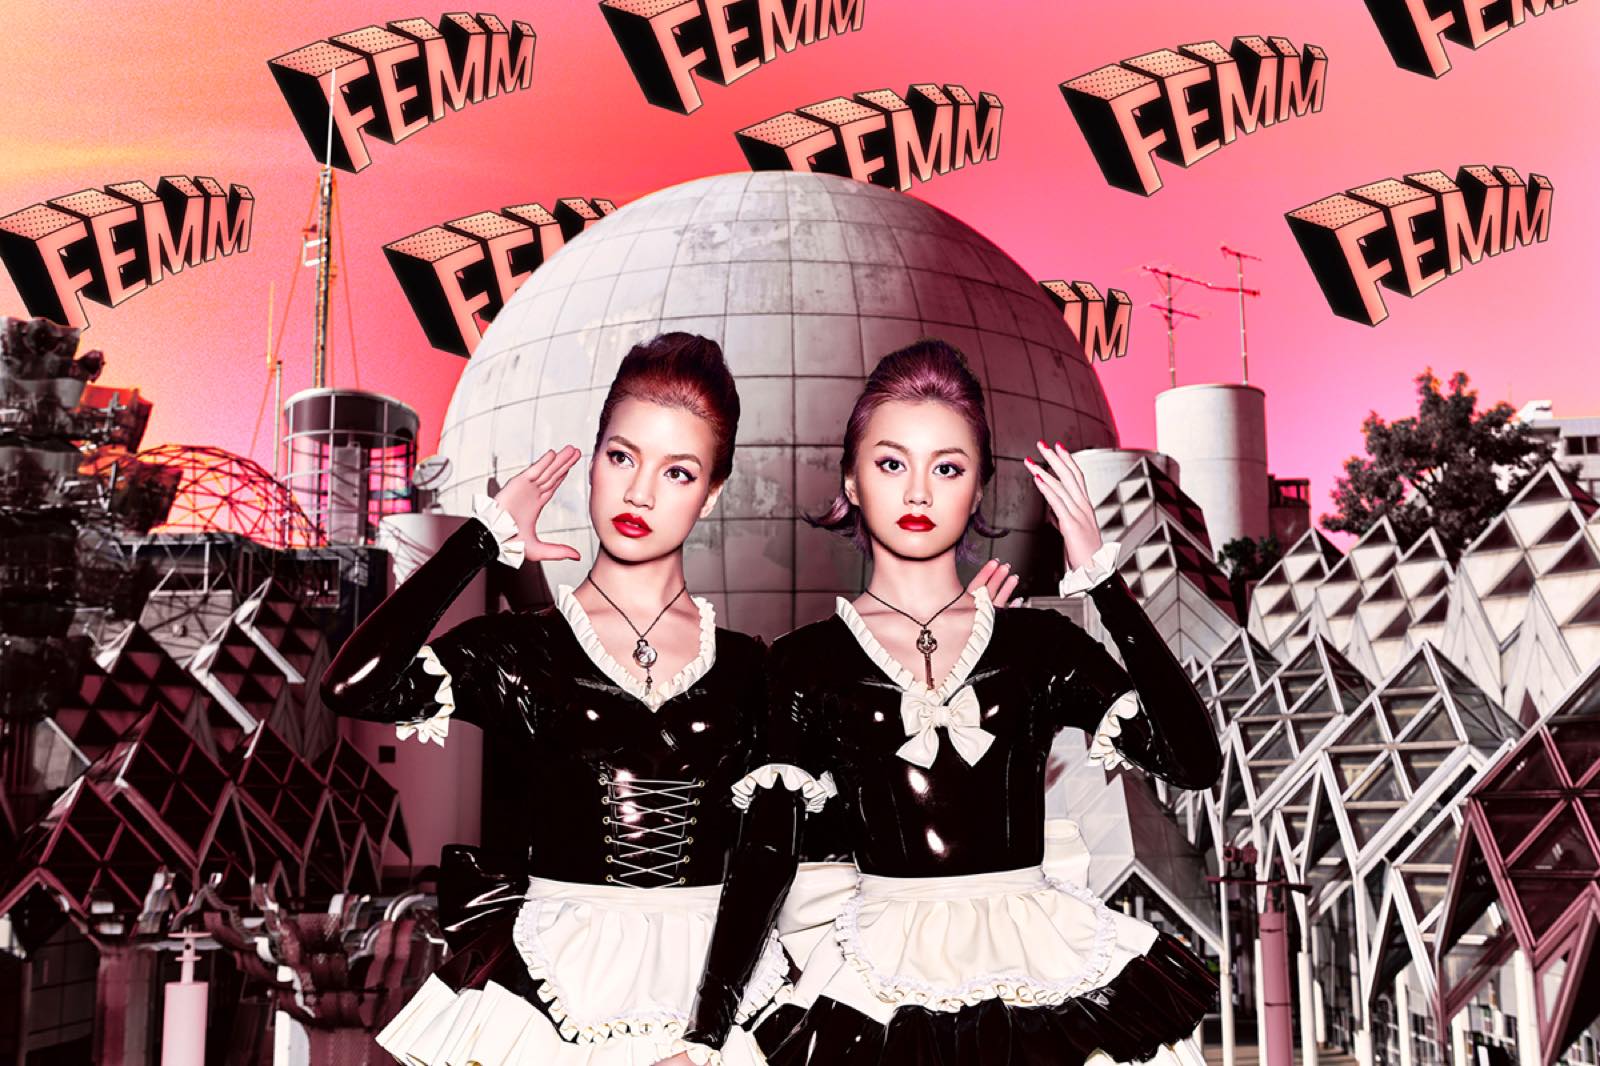 FEMM Deliver a New Year’s Knockout Punch With the MV for “PoW!”